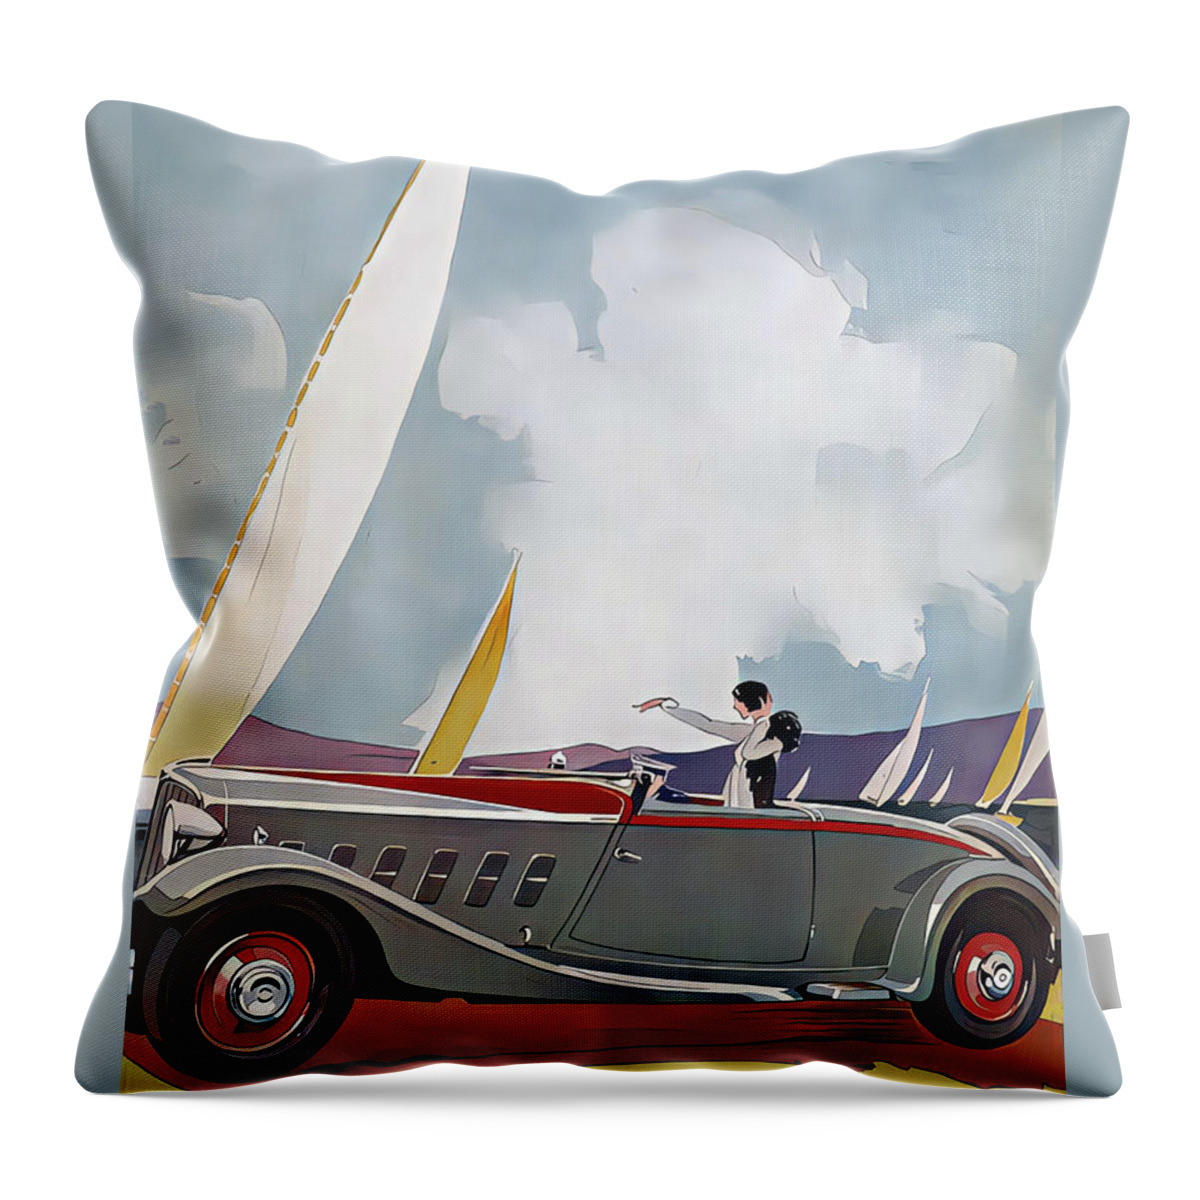 Vintage Throw Pillow featuring the mixed media 1934 Panhard Roadster With Woman Occupant With Sailboats Original French Art Deco Illustration by Retrographs